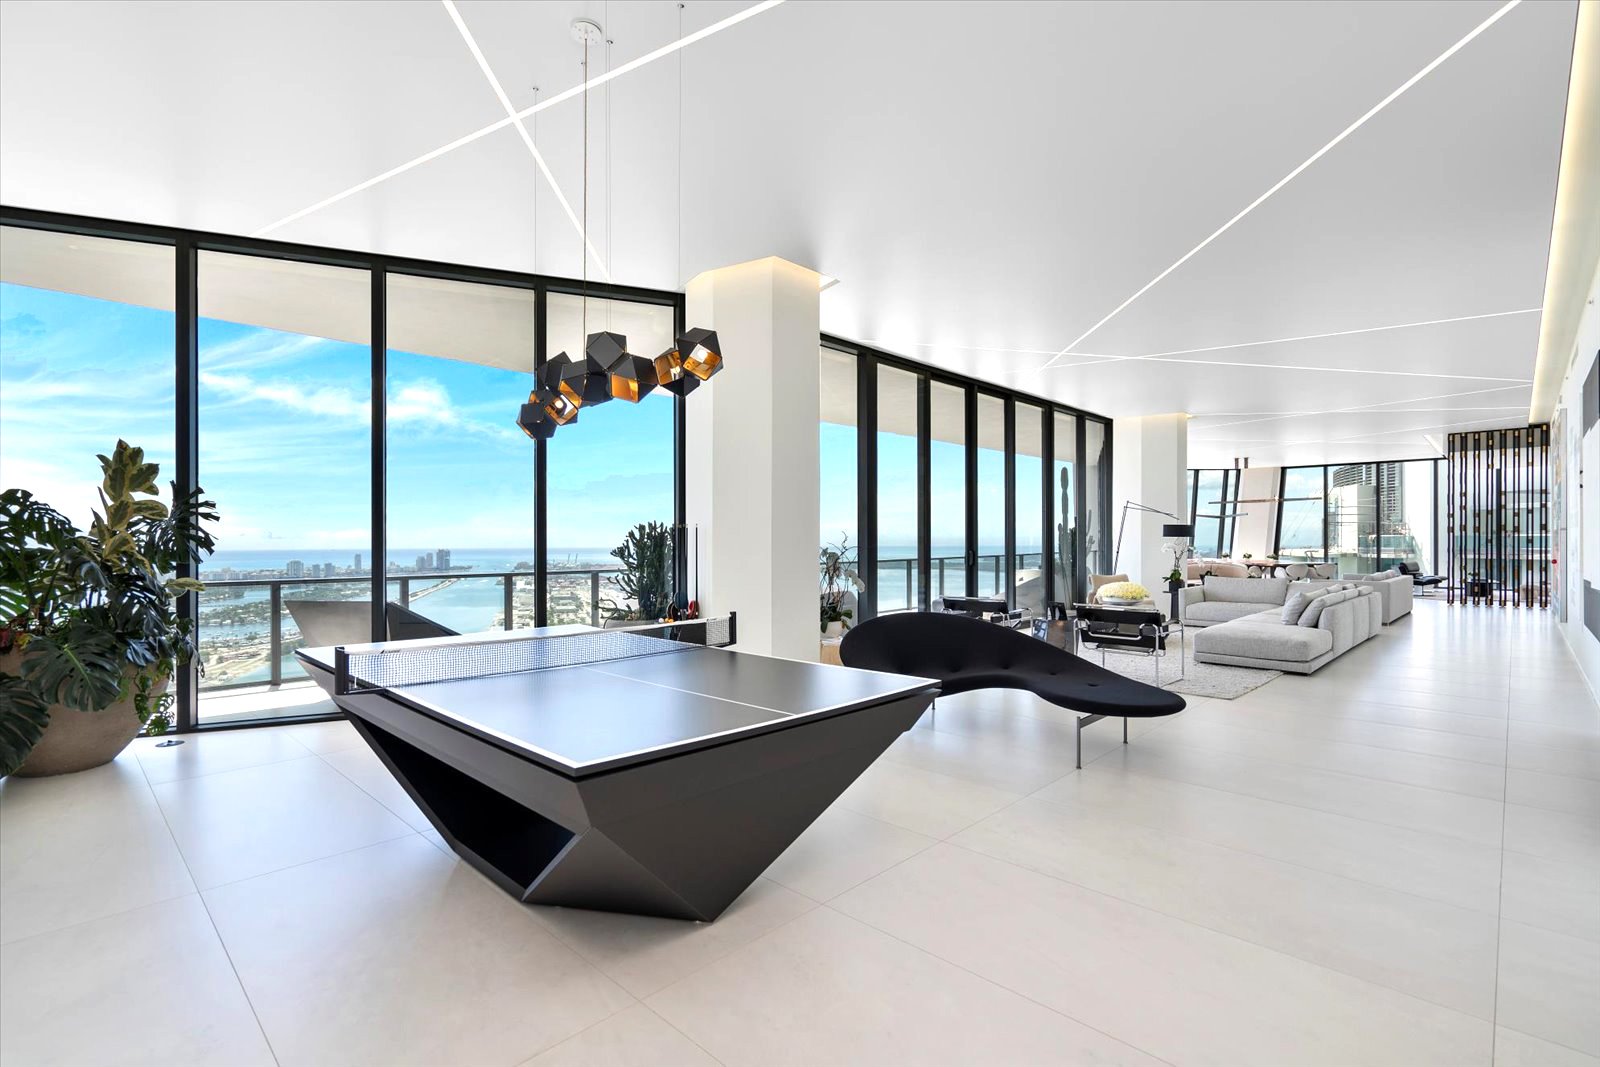 Step Inside A Full Floor Penthouse At The Zaha Hadid-Designed One Thousand Museum Asking $28 Million 23.jpg